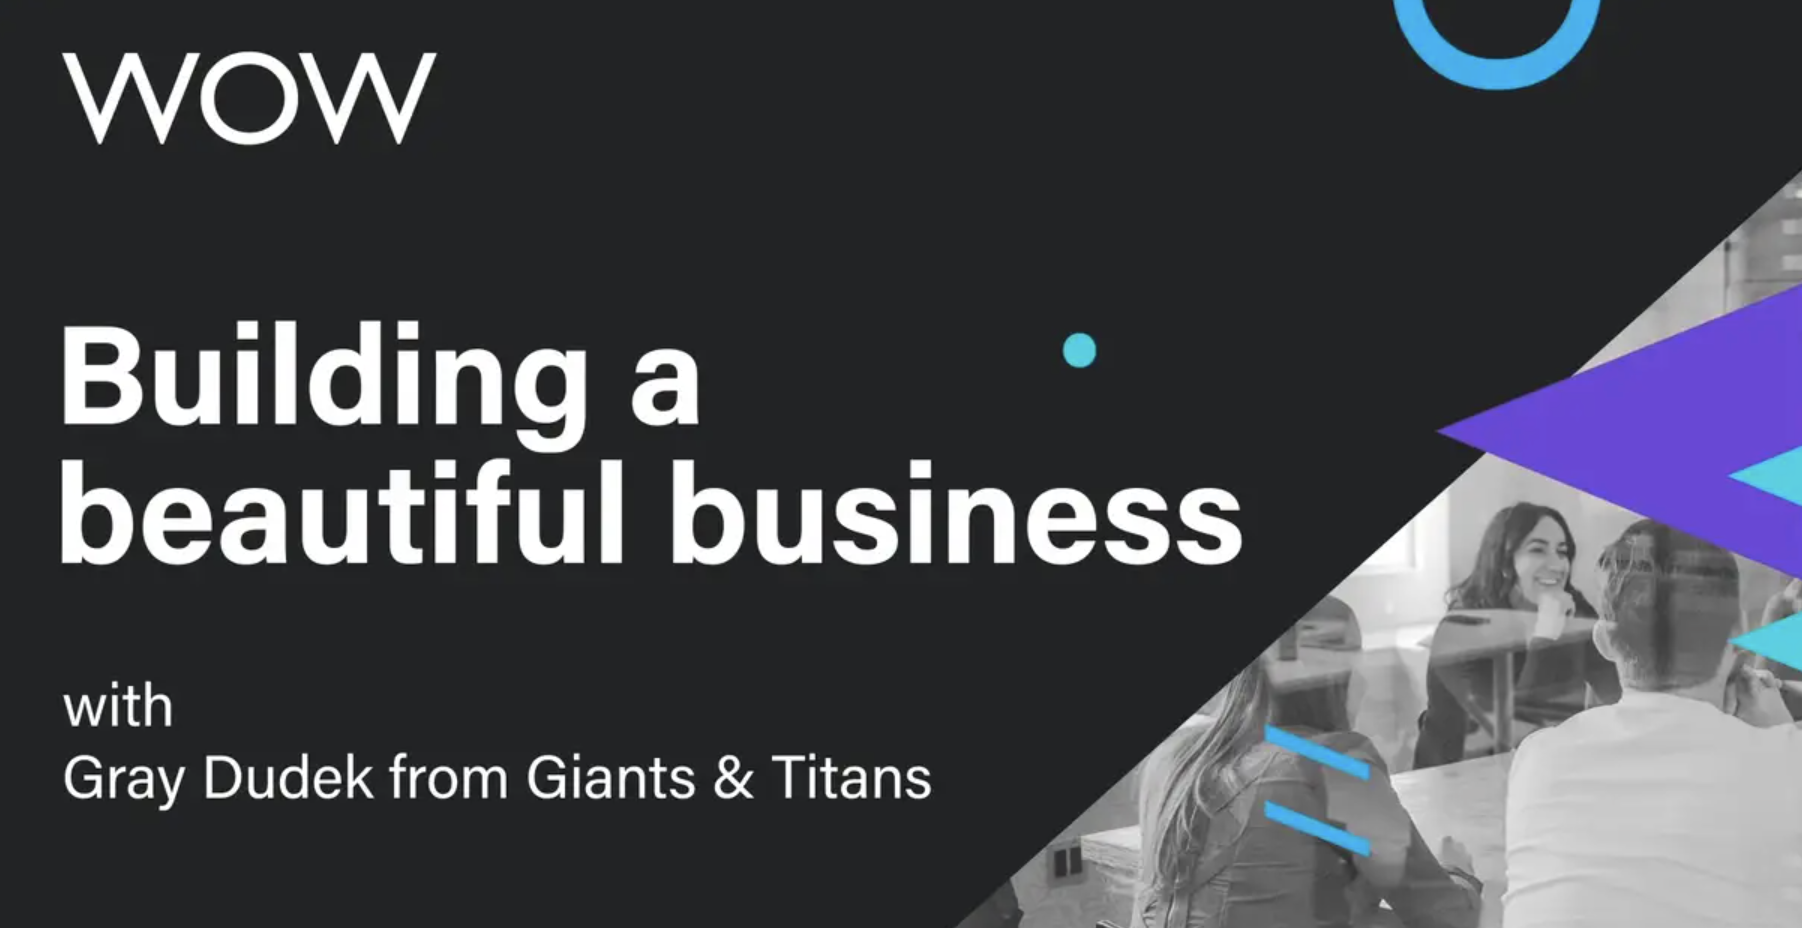 Gray Dudek from creative agency Giants & Titans on Wow Accountant's webinar on Building a beautiful business